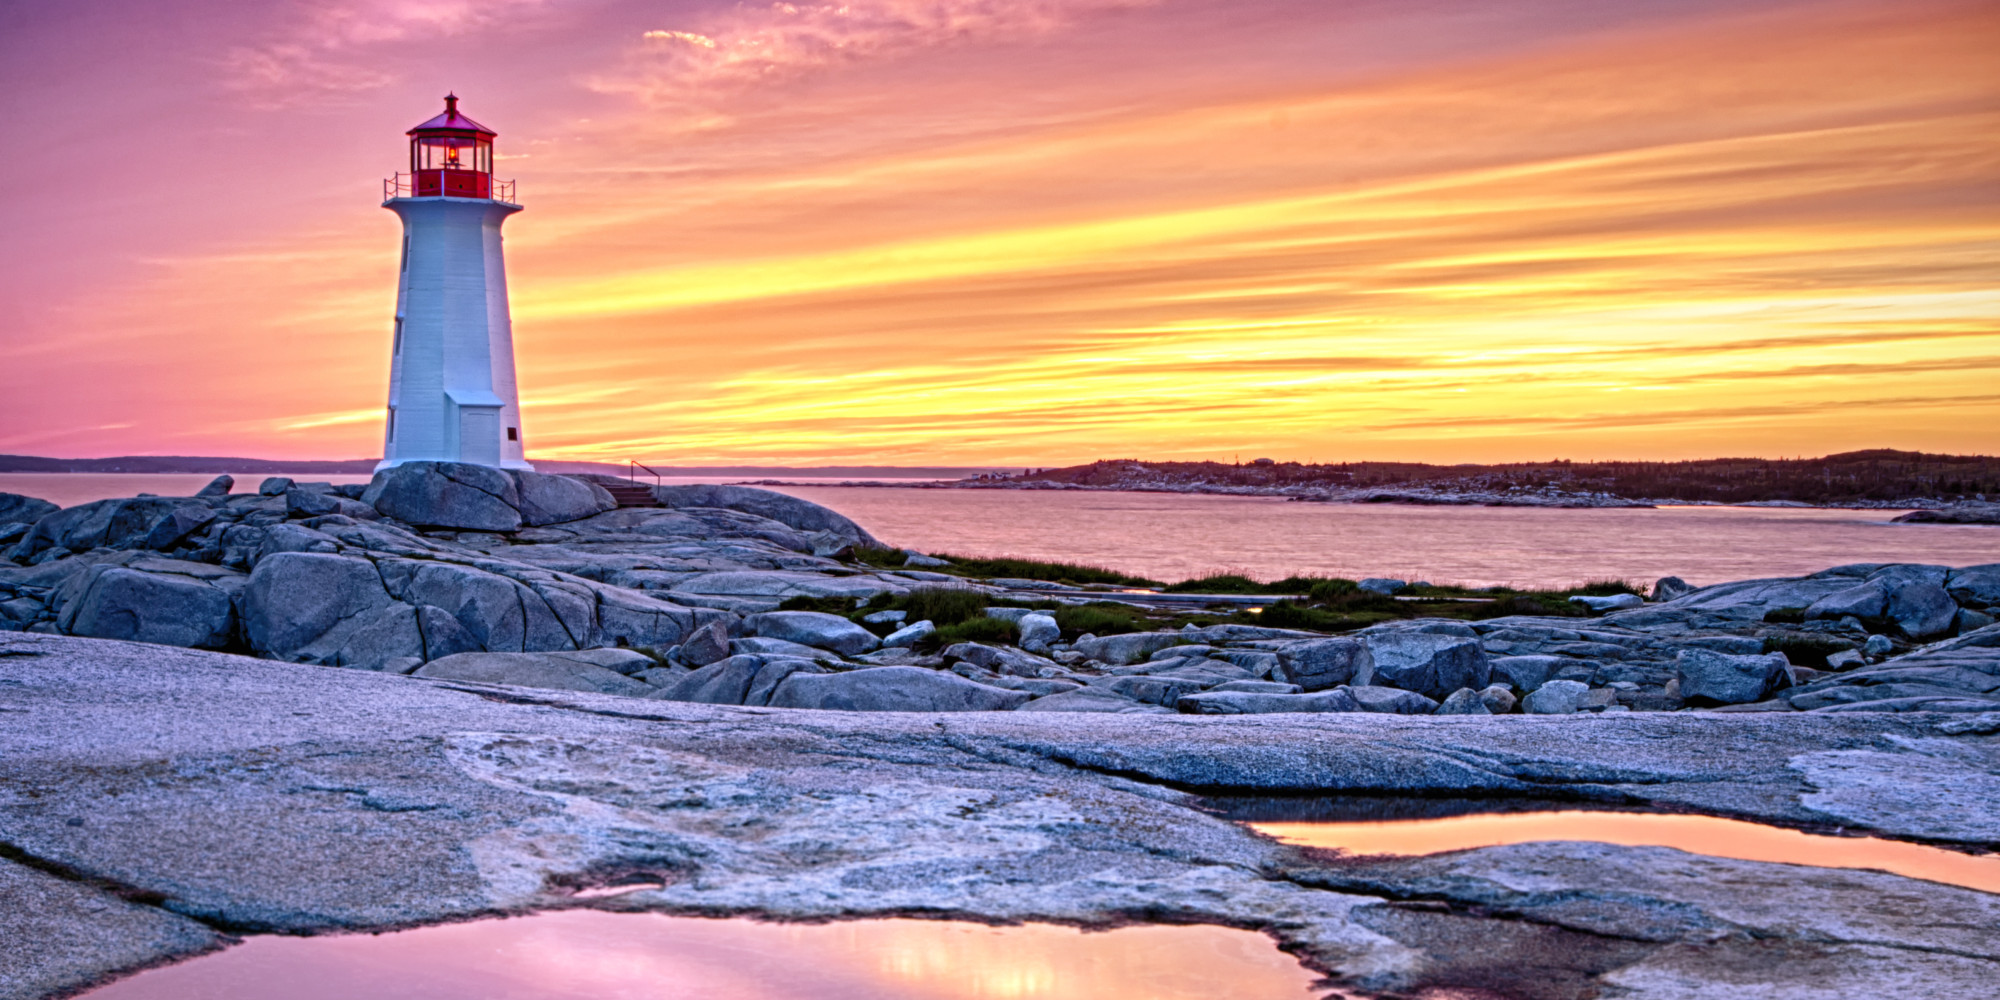 Breathtaking Photos of Lighthouses in Winter | HuffPost